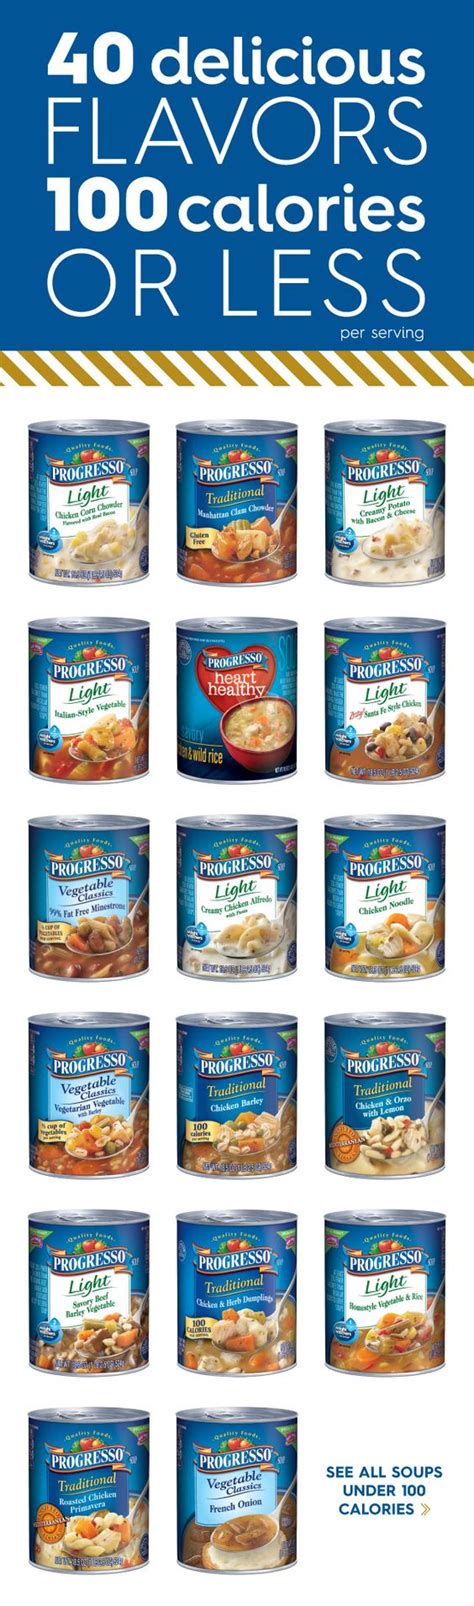 Instead, tuck into one of these 10 healthier snacks under 100 calories. Progresso Light Soups - 40 delicious flavors, 100 calories or less! | Soups | Pinterest | Beans ...